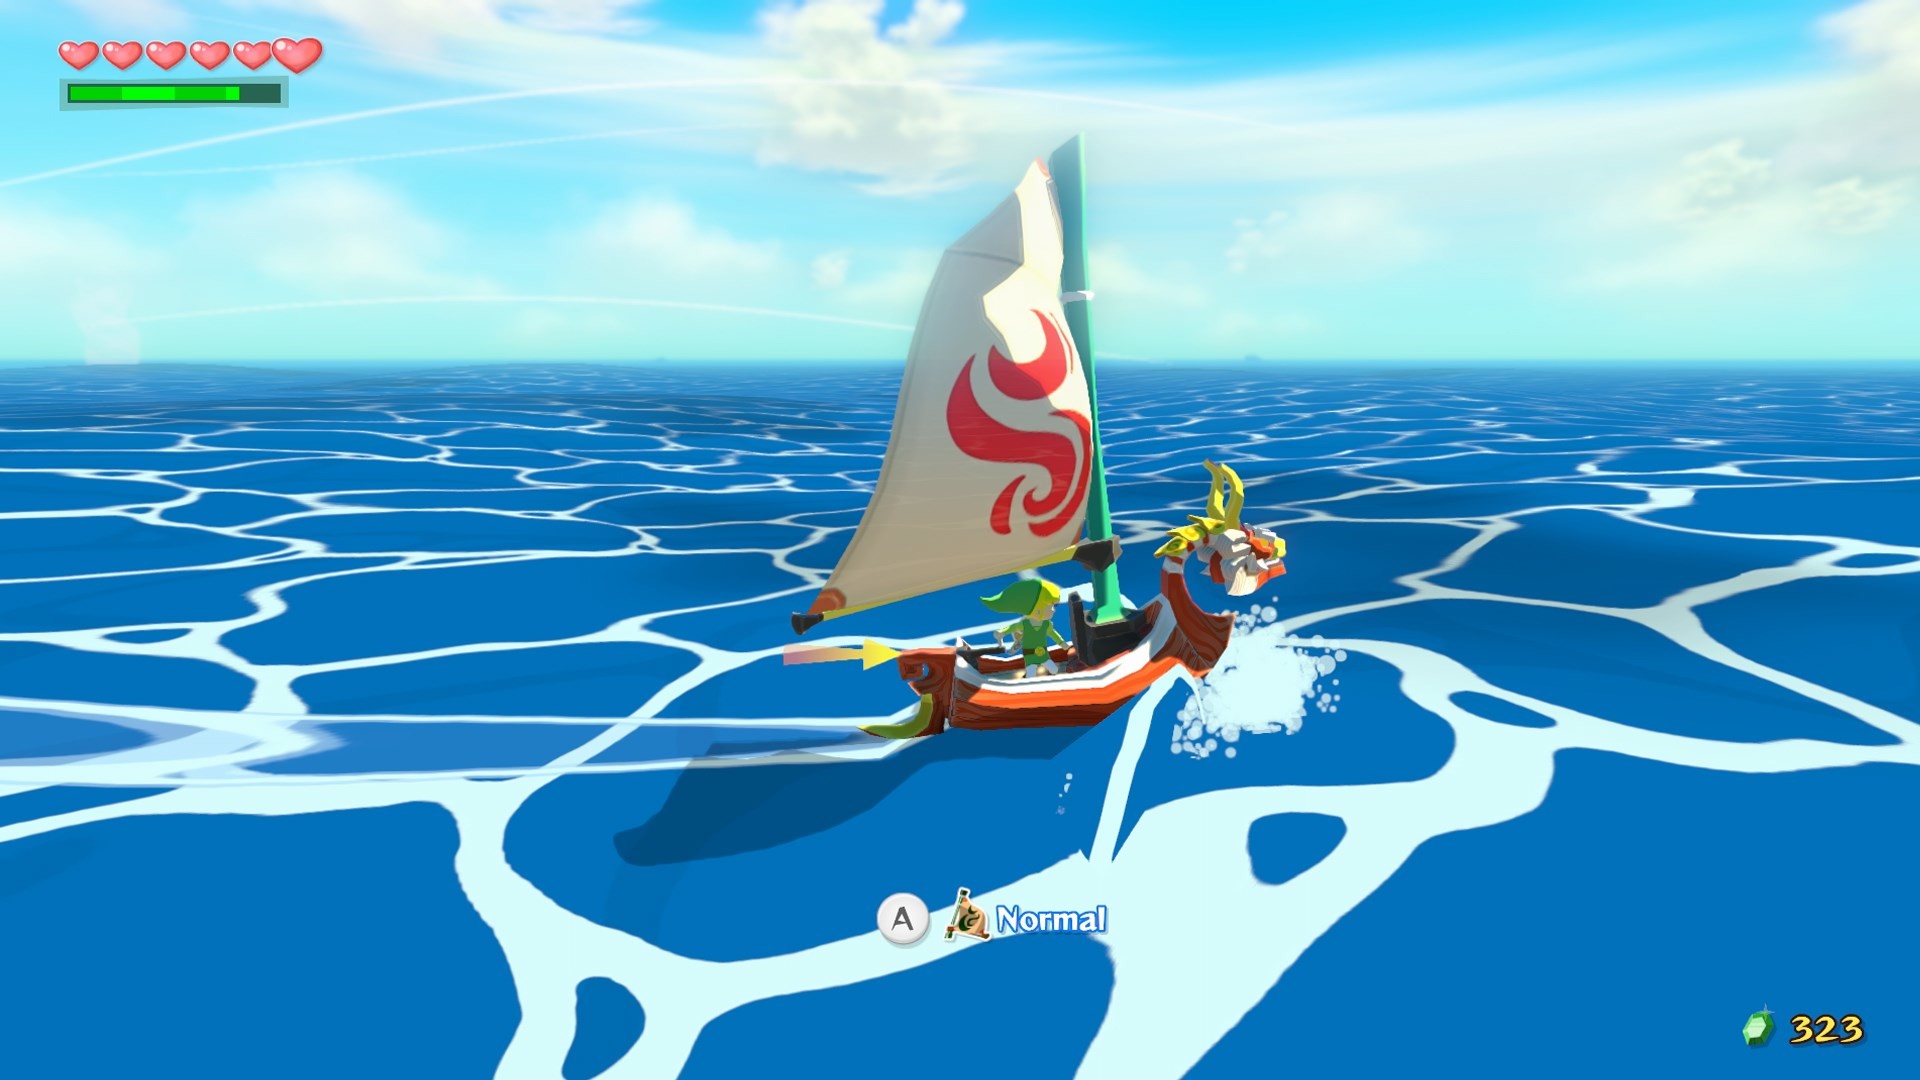 1920x1080 The Legend of Zelda: The Wind Waker HD screenshots, images and pictures -  Giant Bomb